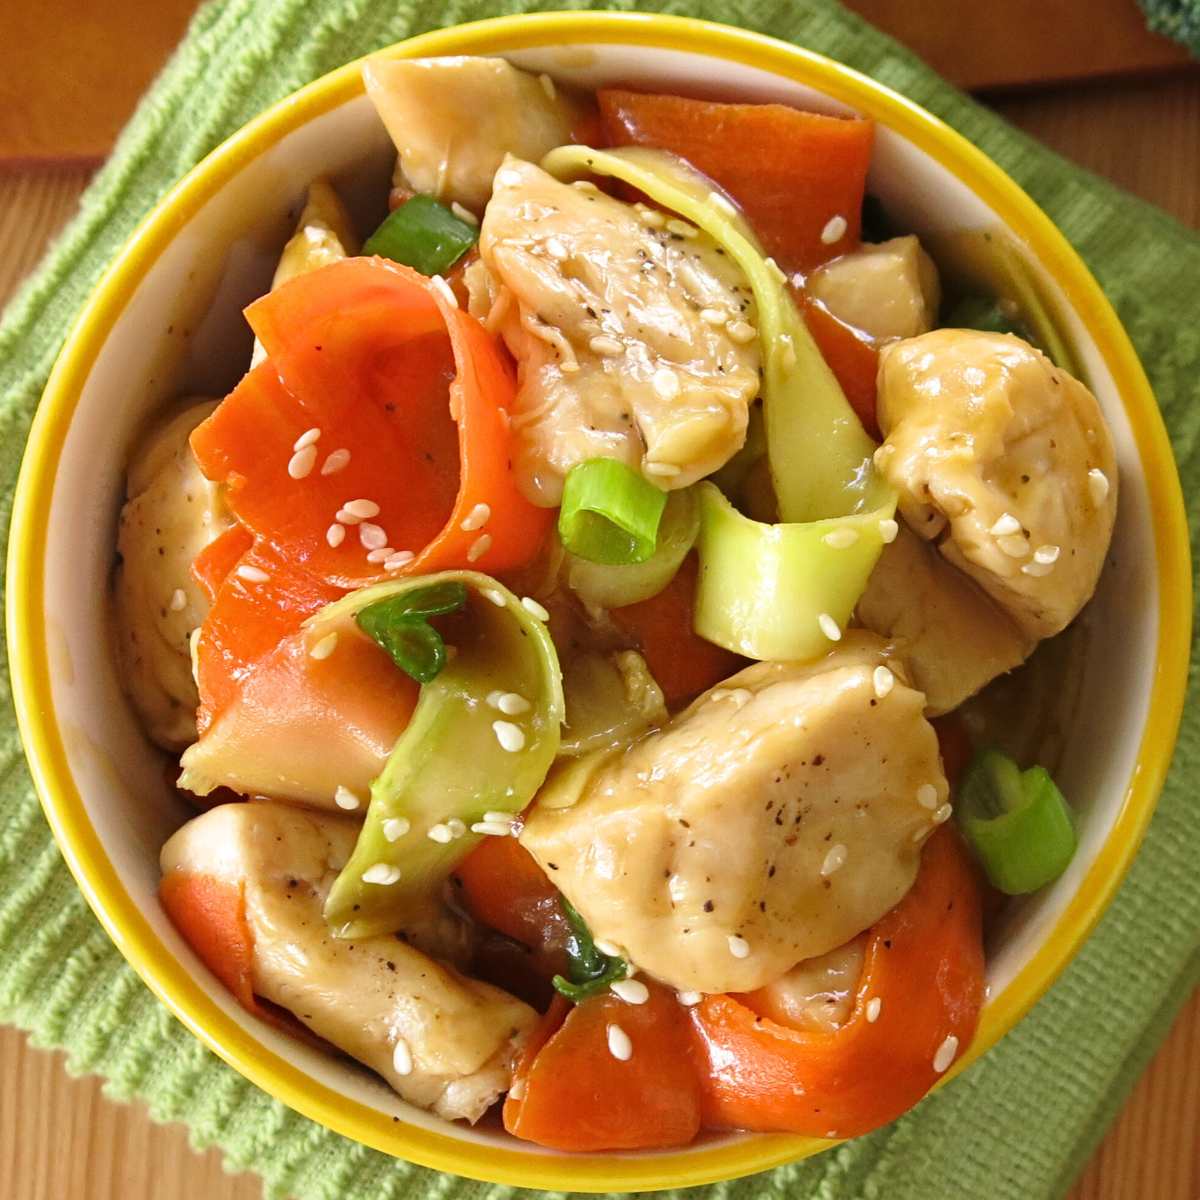 Healthy spicy orange chicken in a bowl with ribbons of carrot and broccoli.